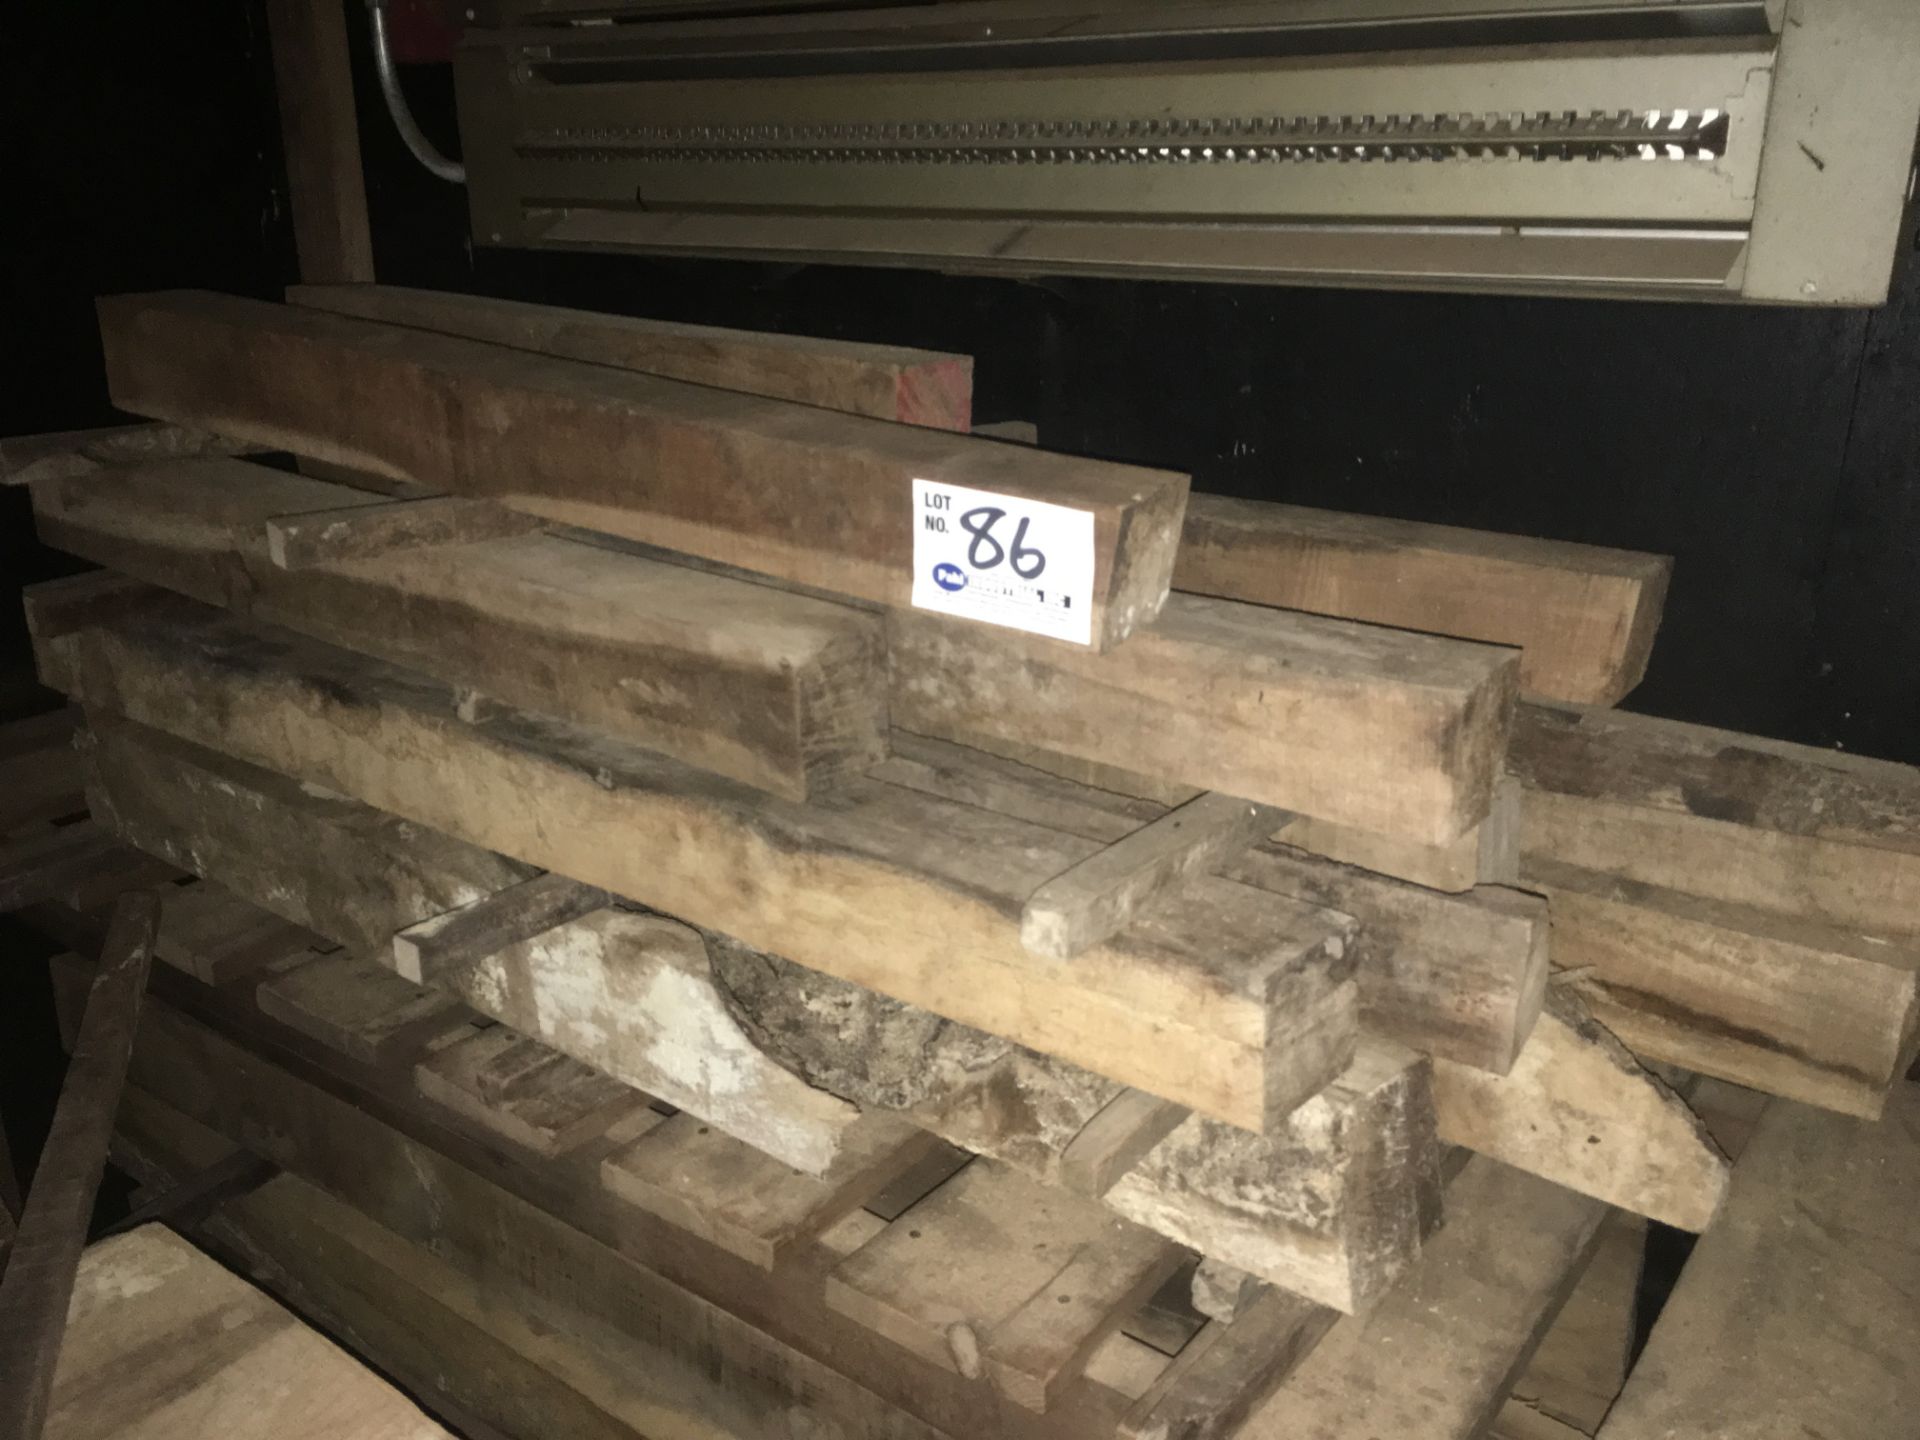 12 3.5" x 3.5" x 2-4' Long kiln Dried Myrtlewood boards - approximately 37 bd ft